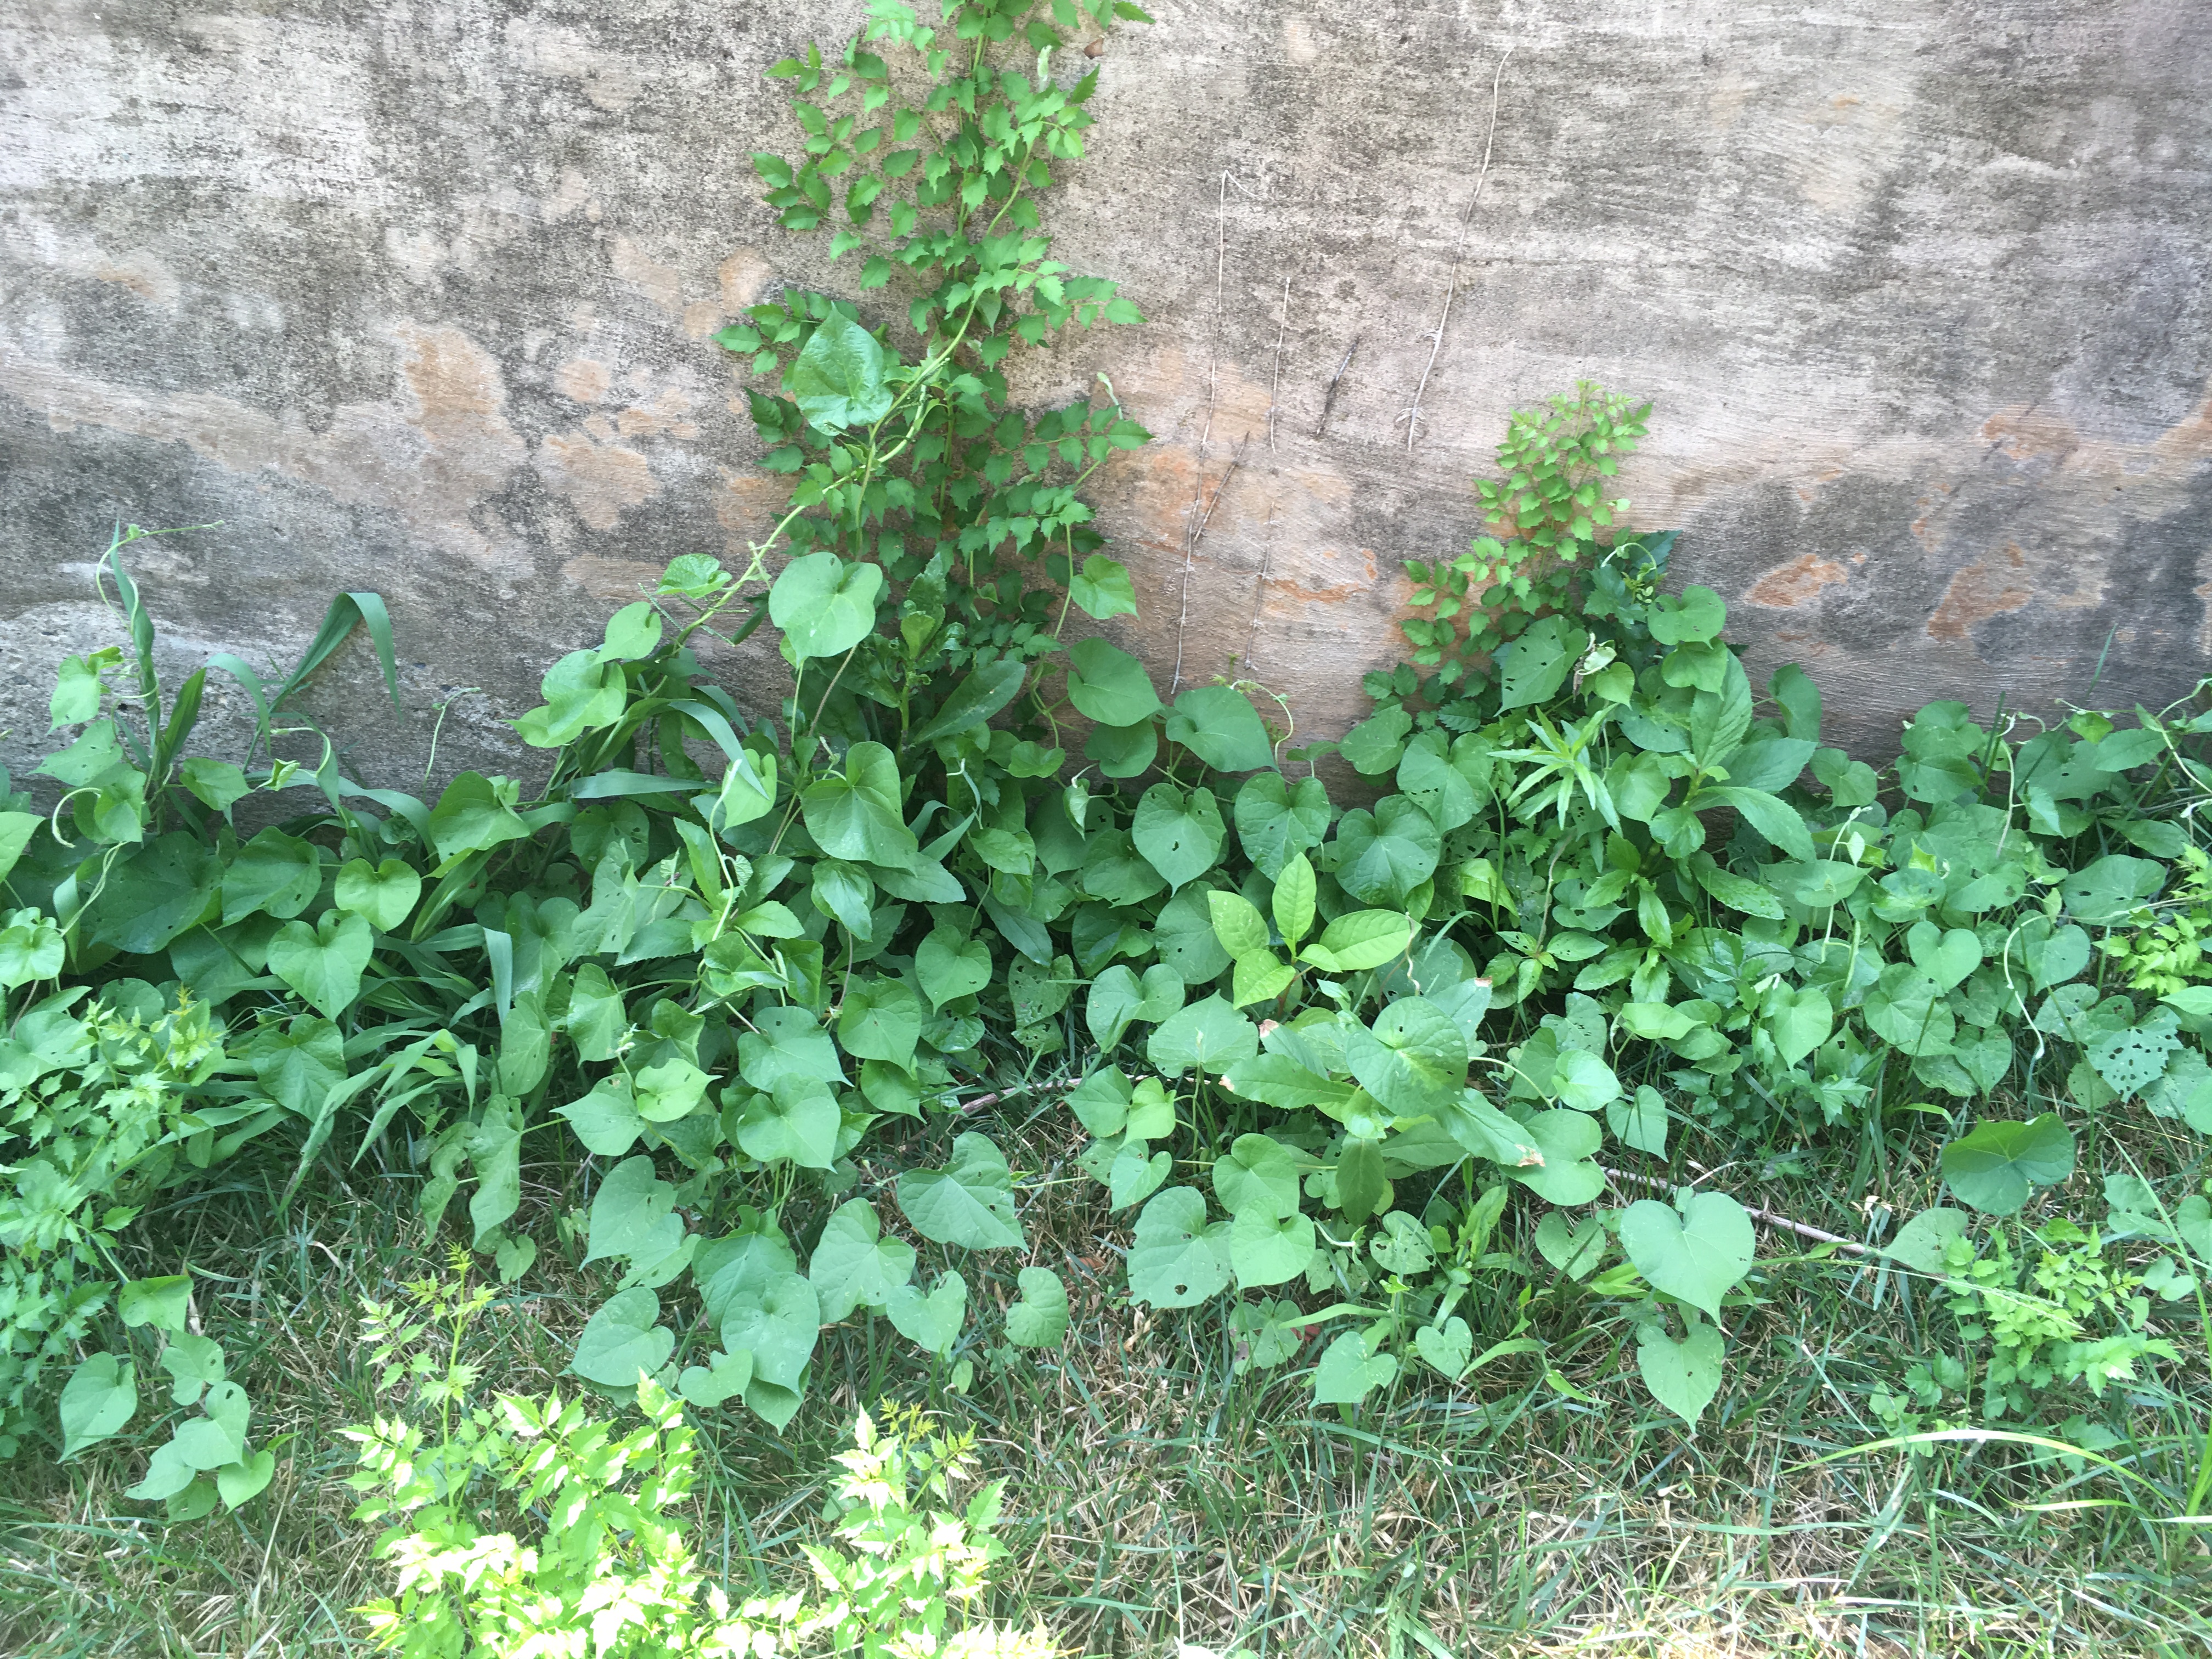 More invasive weeds that sprang up unchecked...yet I'm paying for anti-weed control.